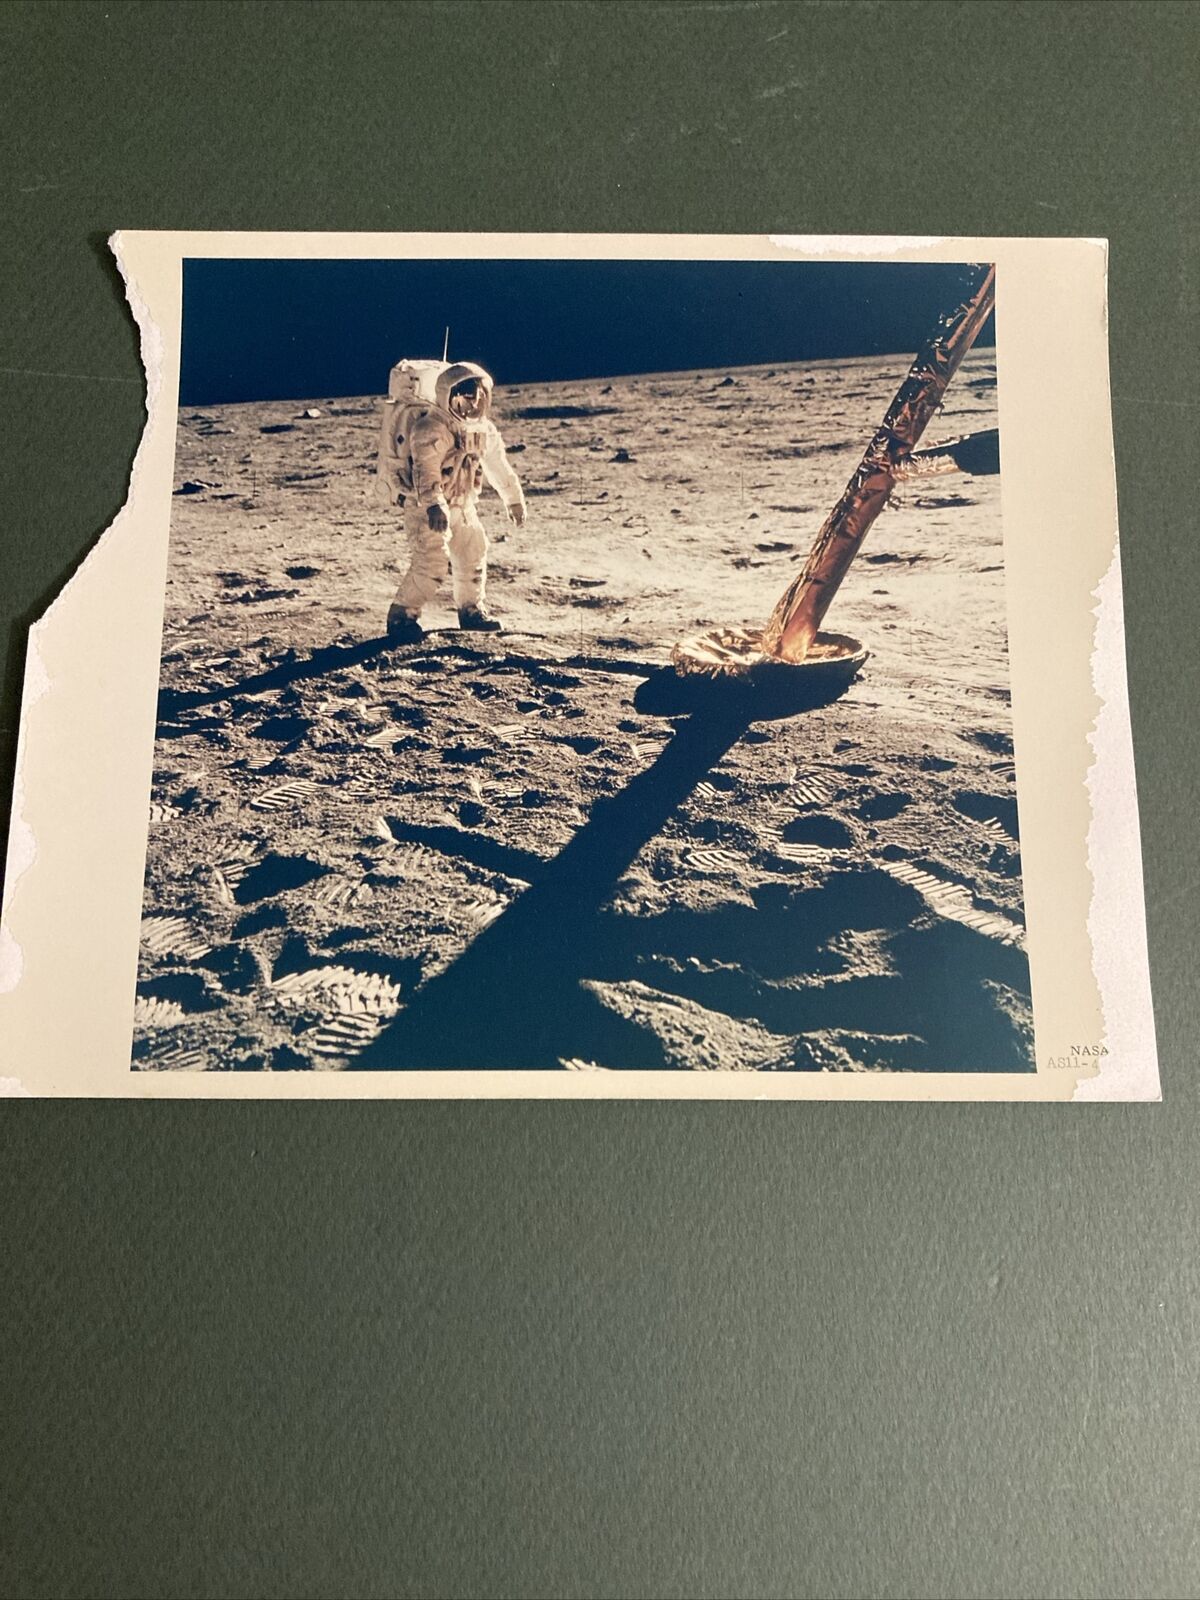 NASA Apollo 11 Type 1 Photograph With Damage SOLD AS IS.